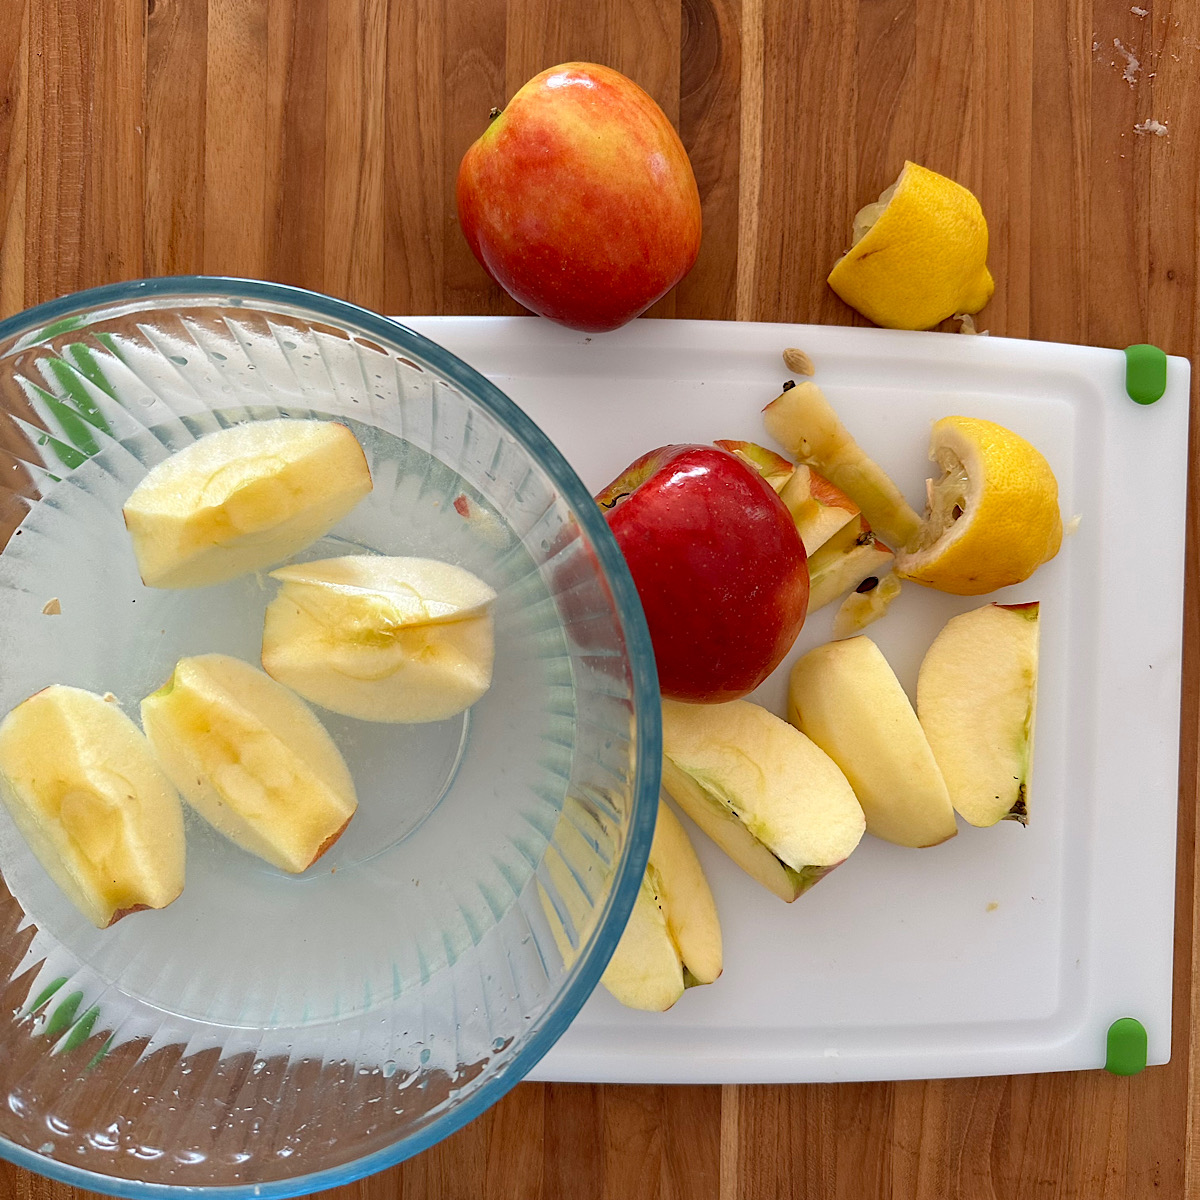 Apples that have been peeled, quartered and cored and placed in lemon water.